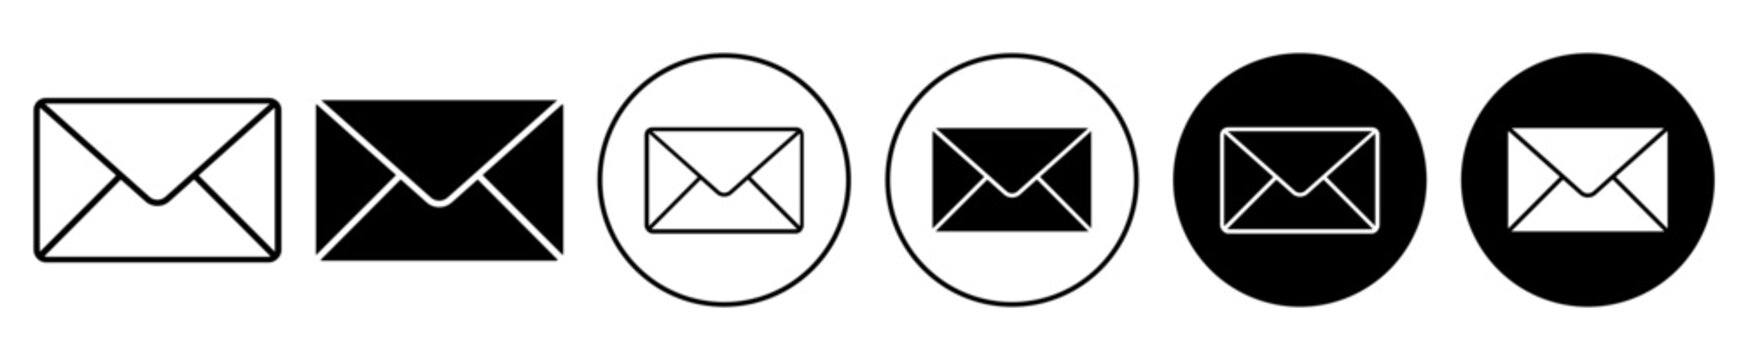 email icon set. post mail vector symbol. message envelope sign in black filled and outlined style.